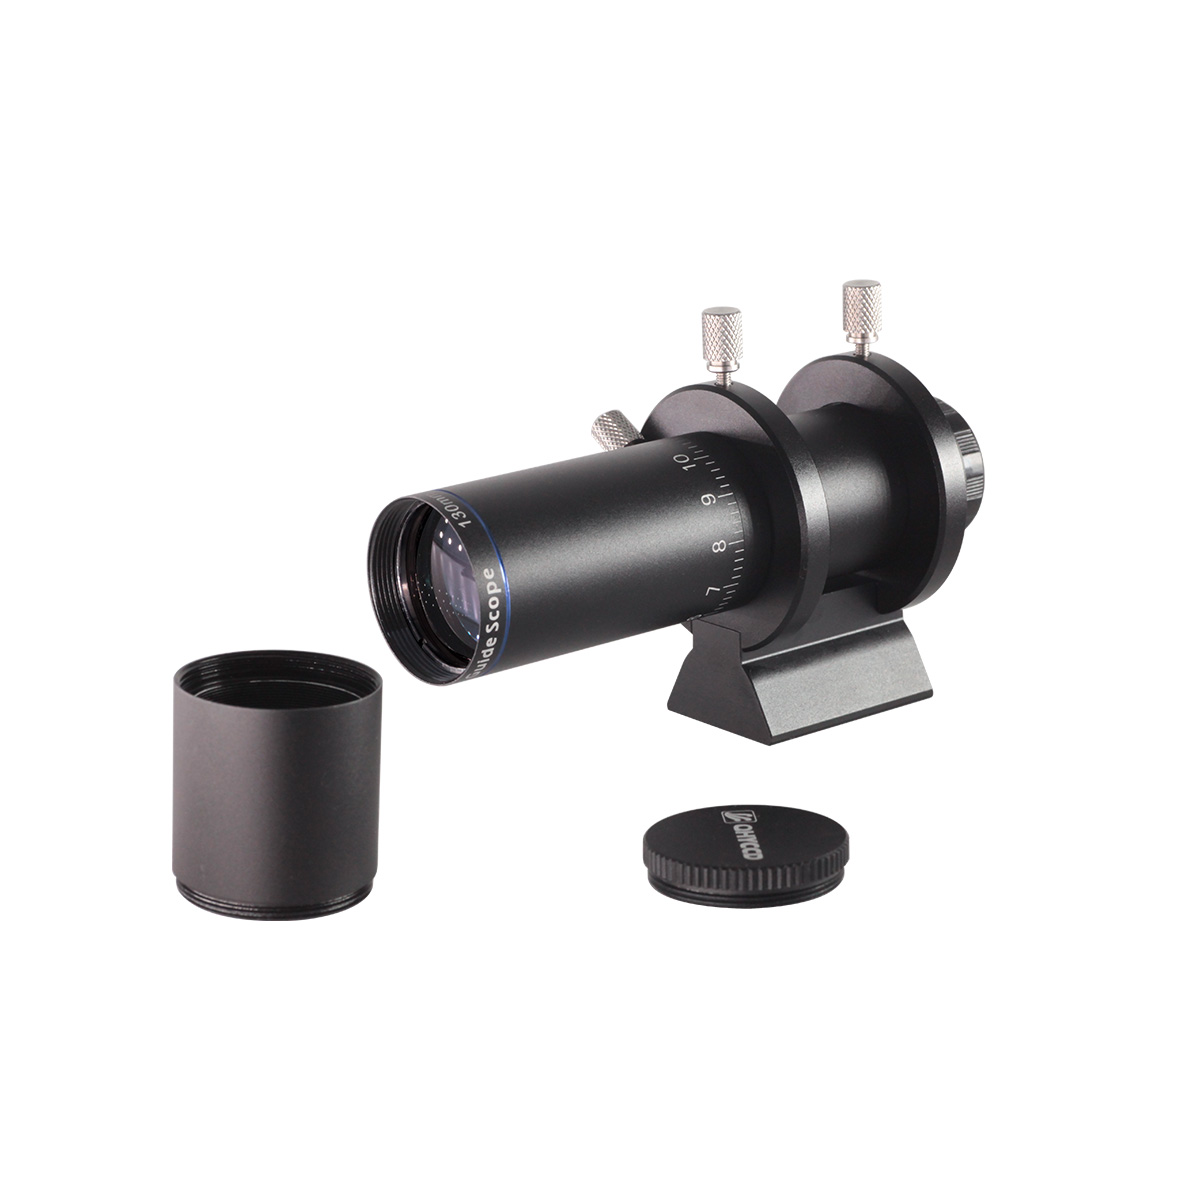 Since March 2023, The QHY Mini Guide Scope will change from silver-green look to black-blue one, while the founction and price keep the same. The Mini Scope of new look can better suit the new QHY5III series planetary/guiding cameras.